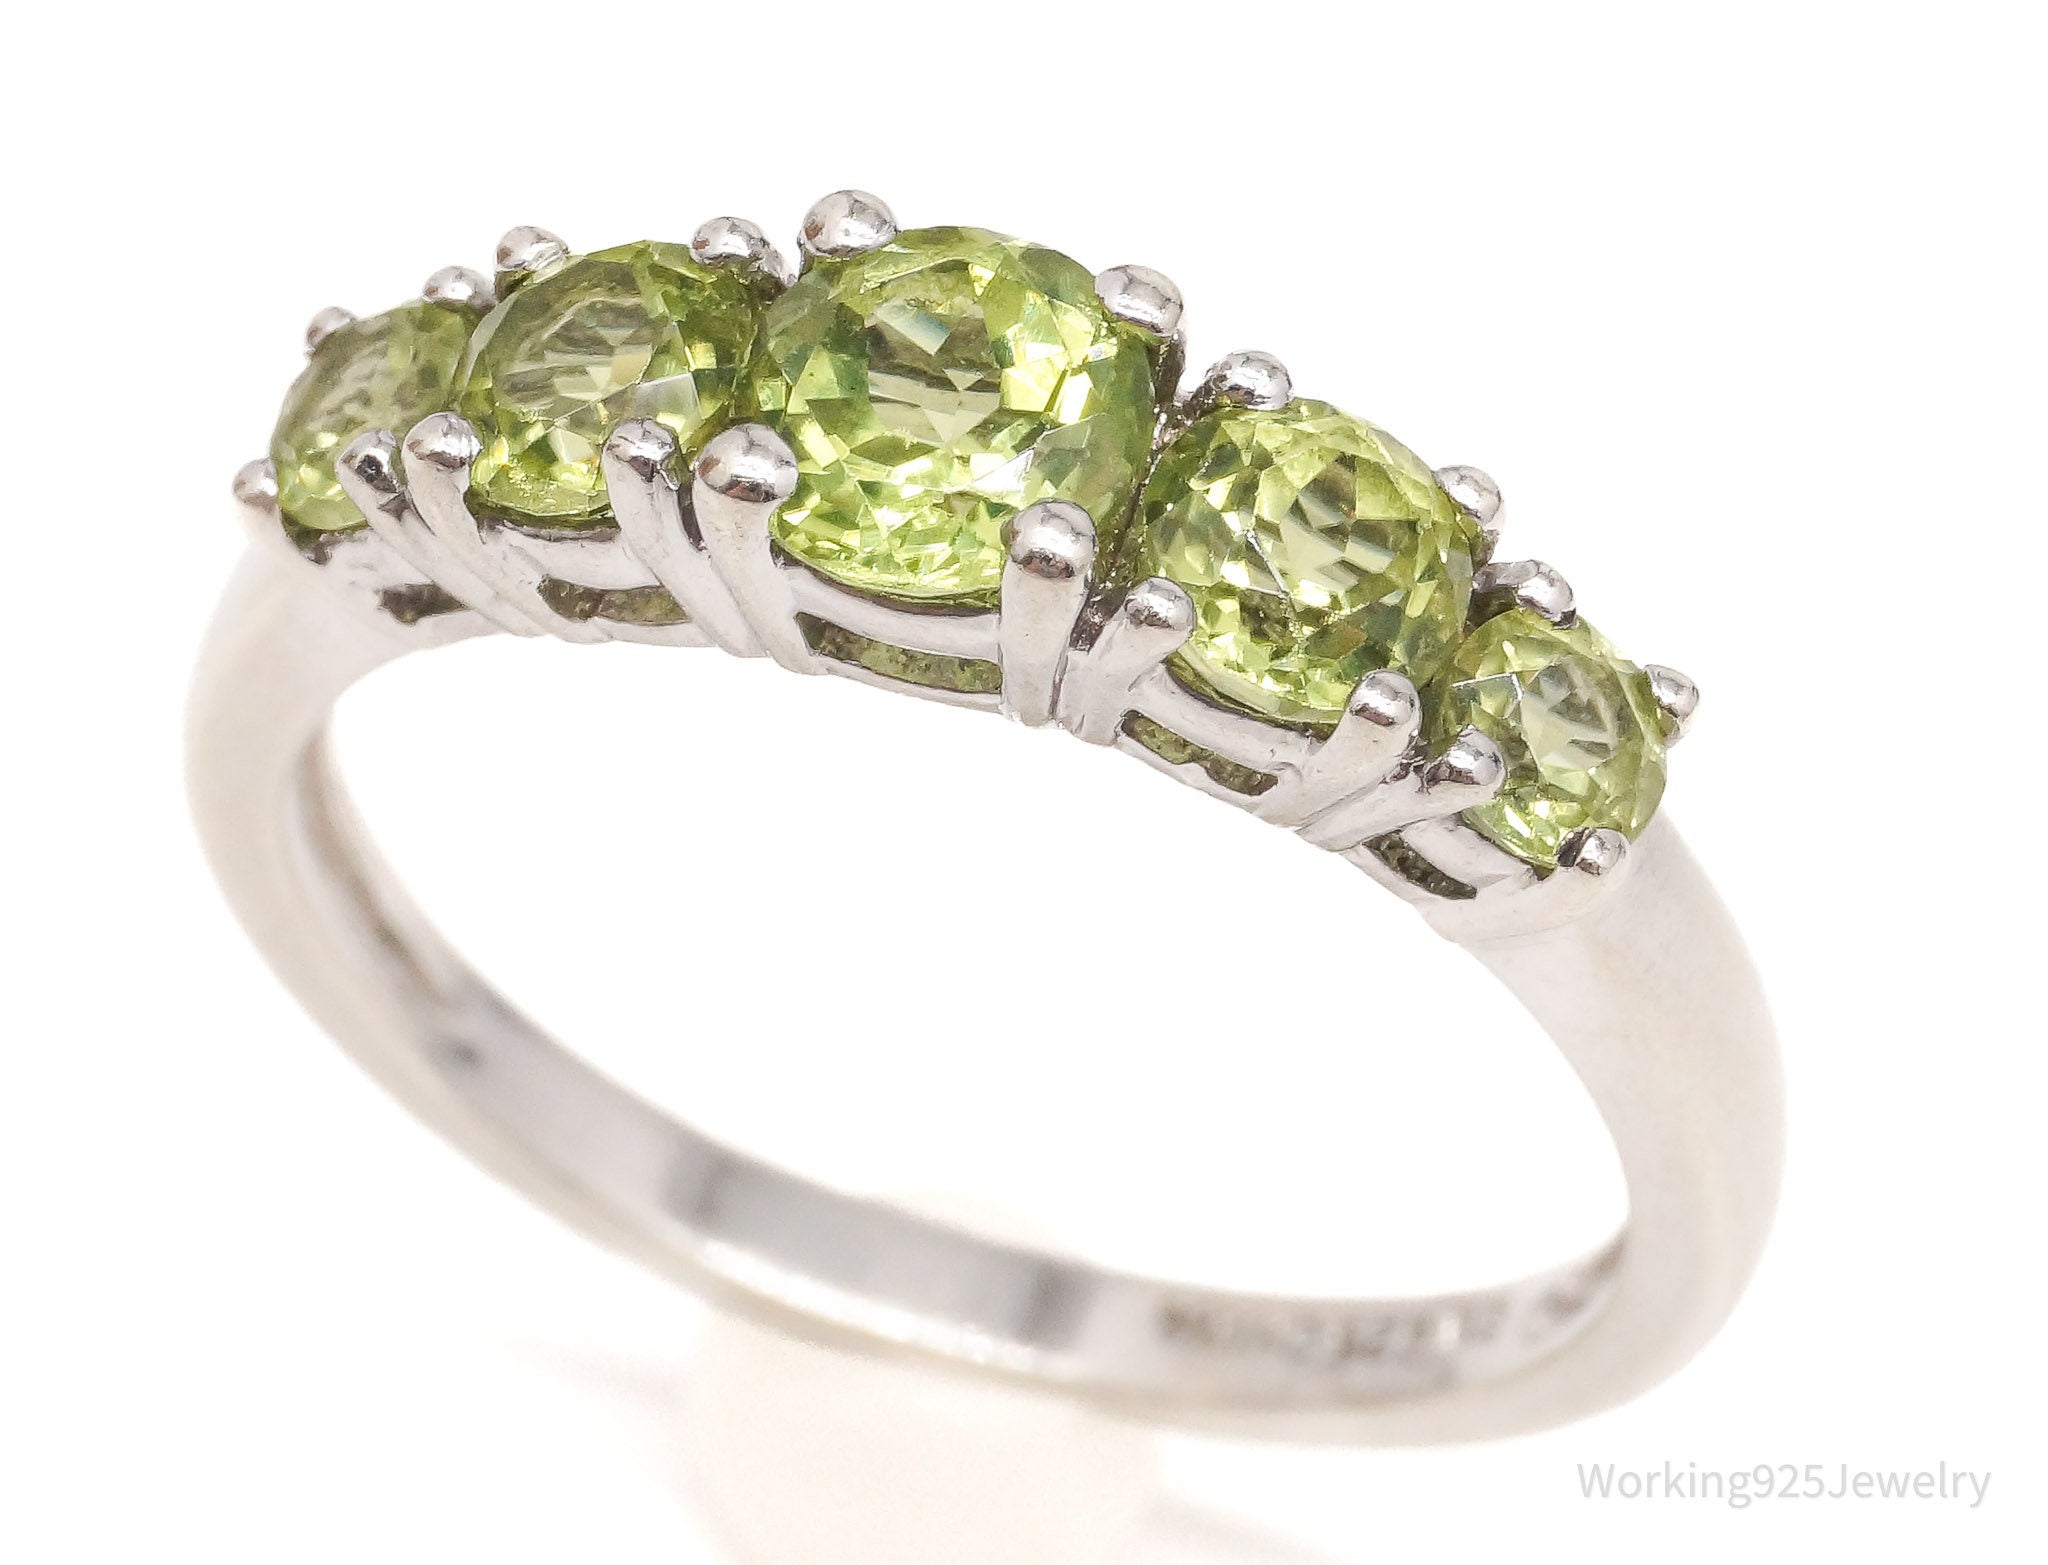 Vintage Peridot Sterling Silver Ring - Size 10